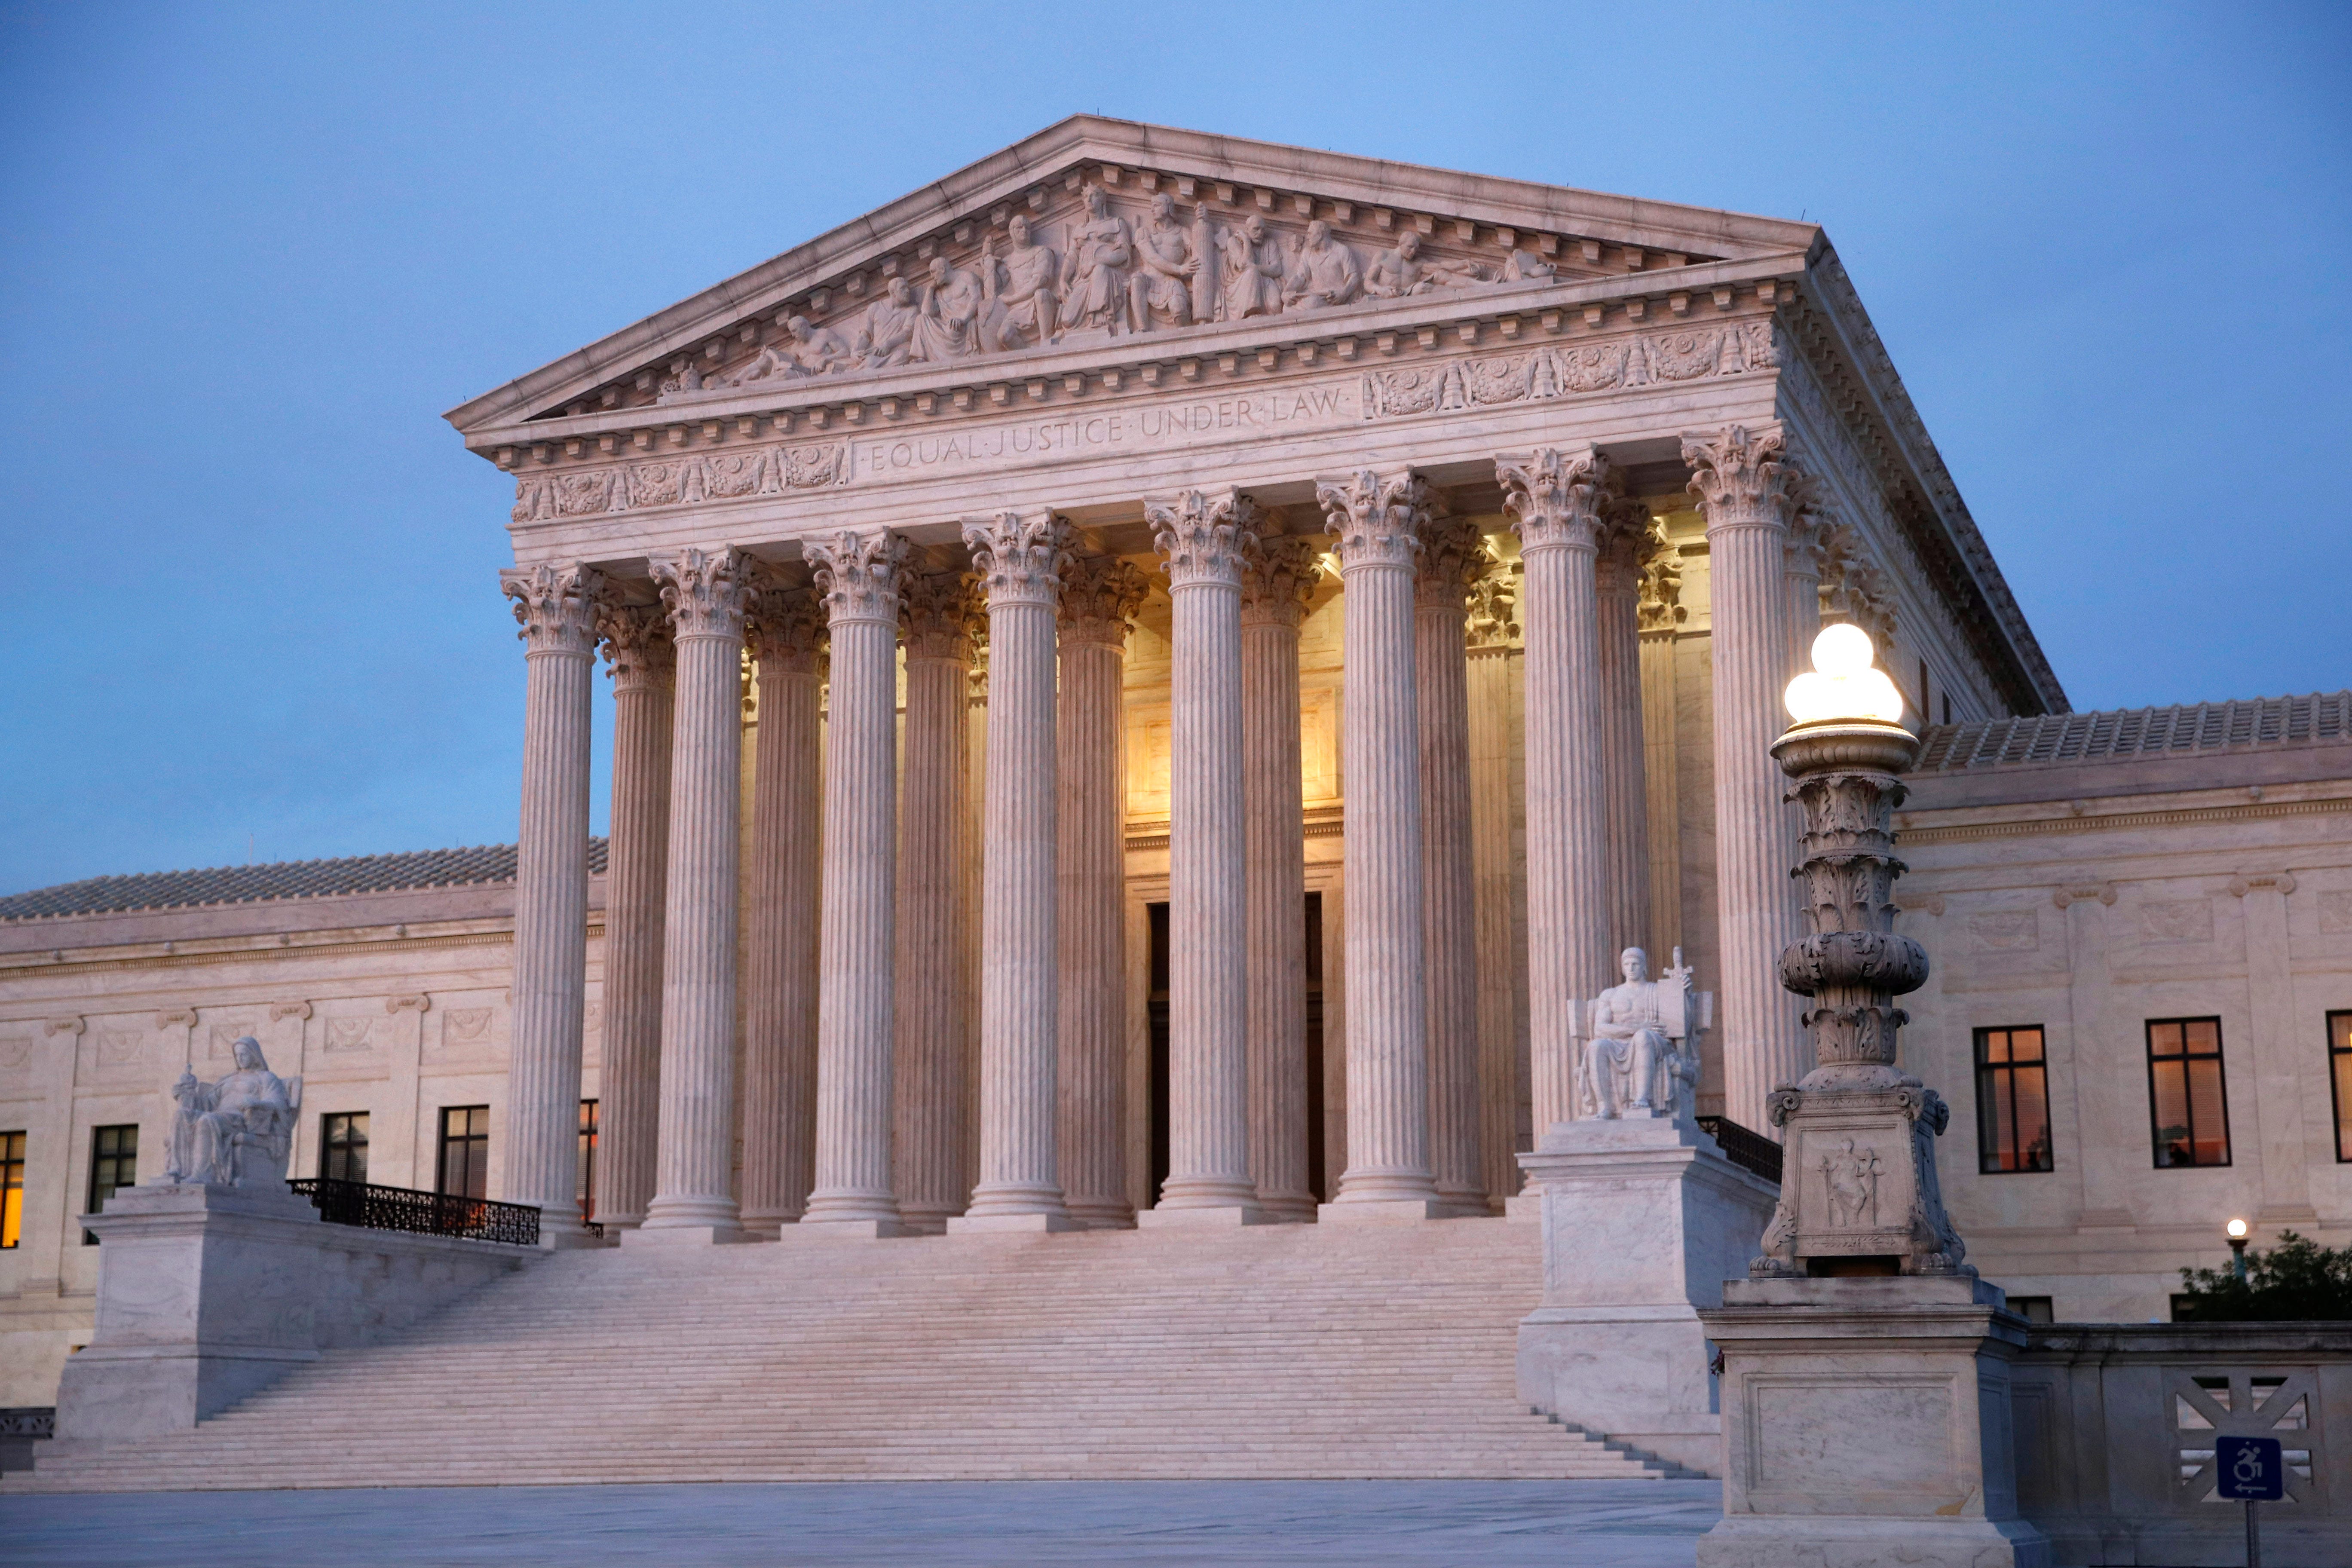 The U.S. Supreme Court building on Capitol Hill in Washington.